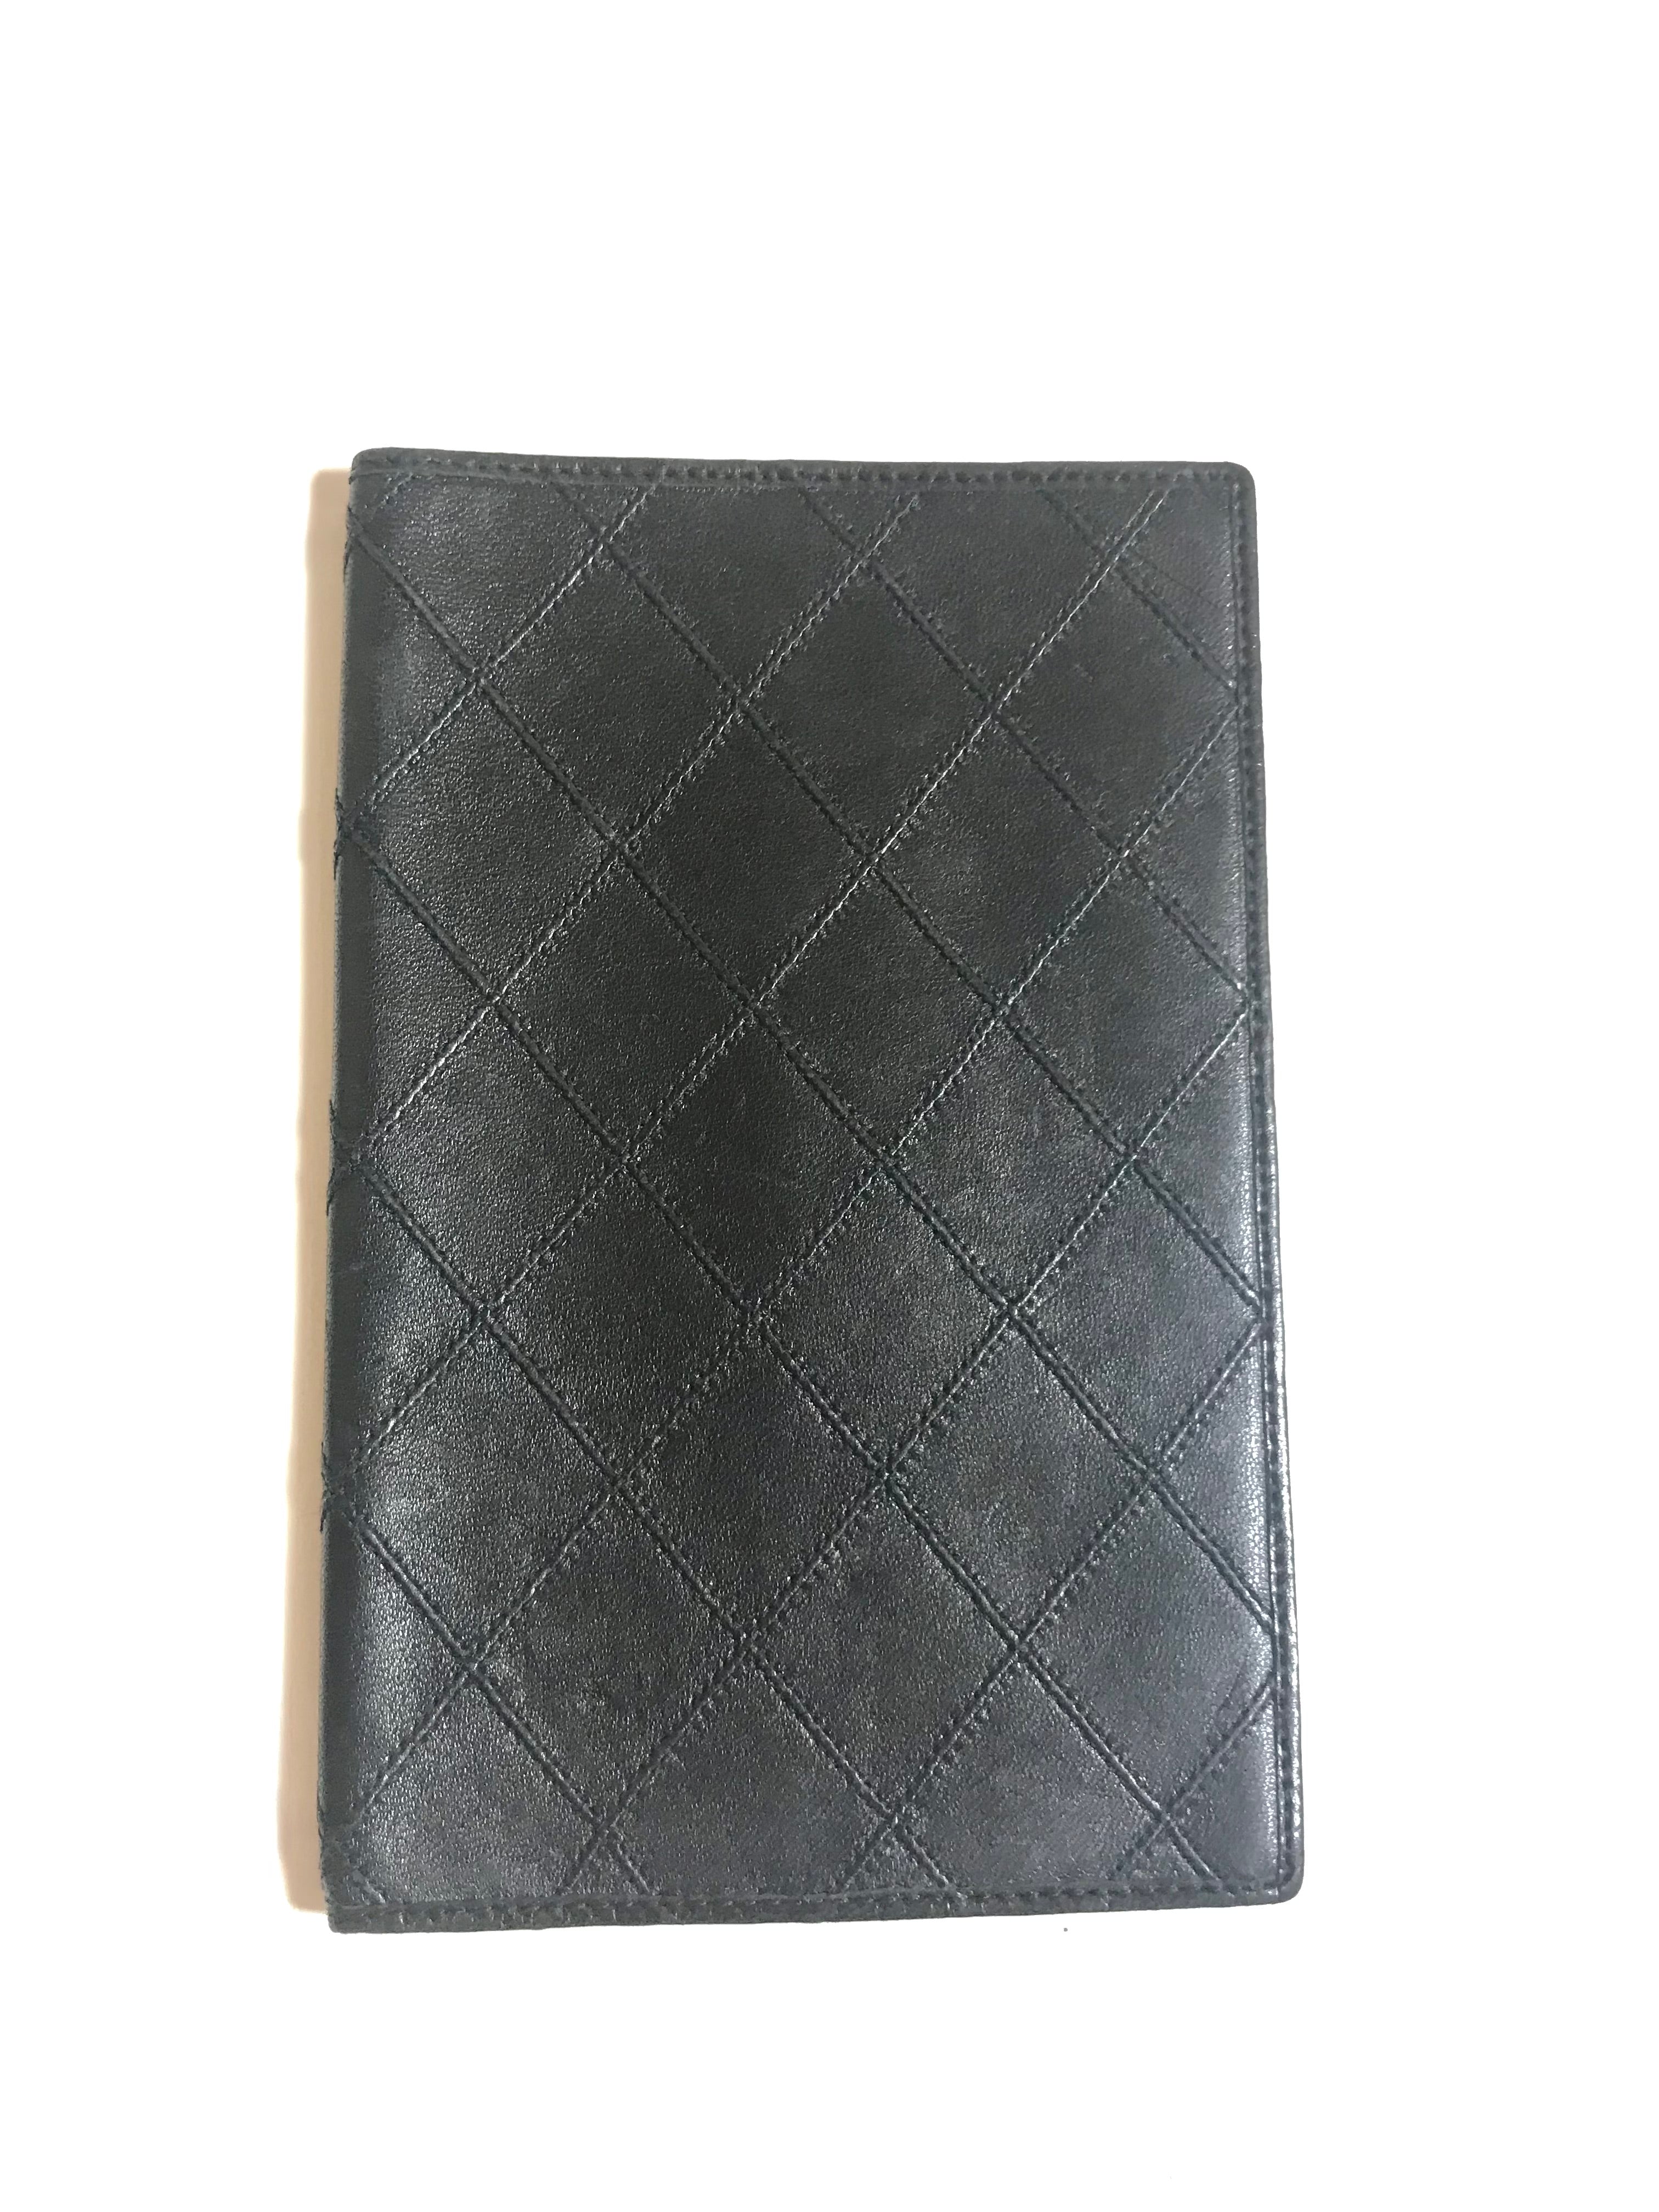 Preloved CHANEL Black Leather Agenda Notebook Cover 10398160 030123 –  KimmieBBags LLC